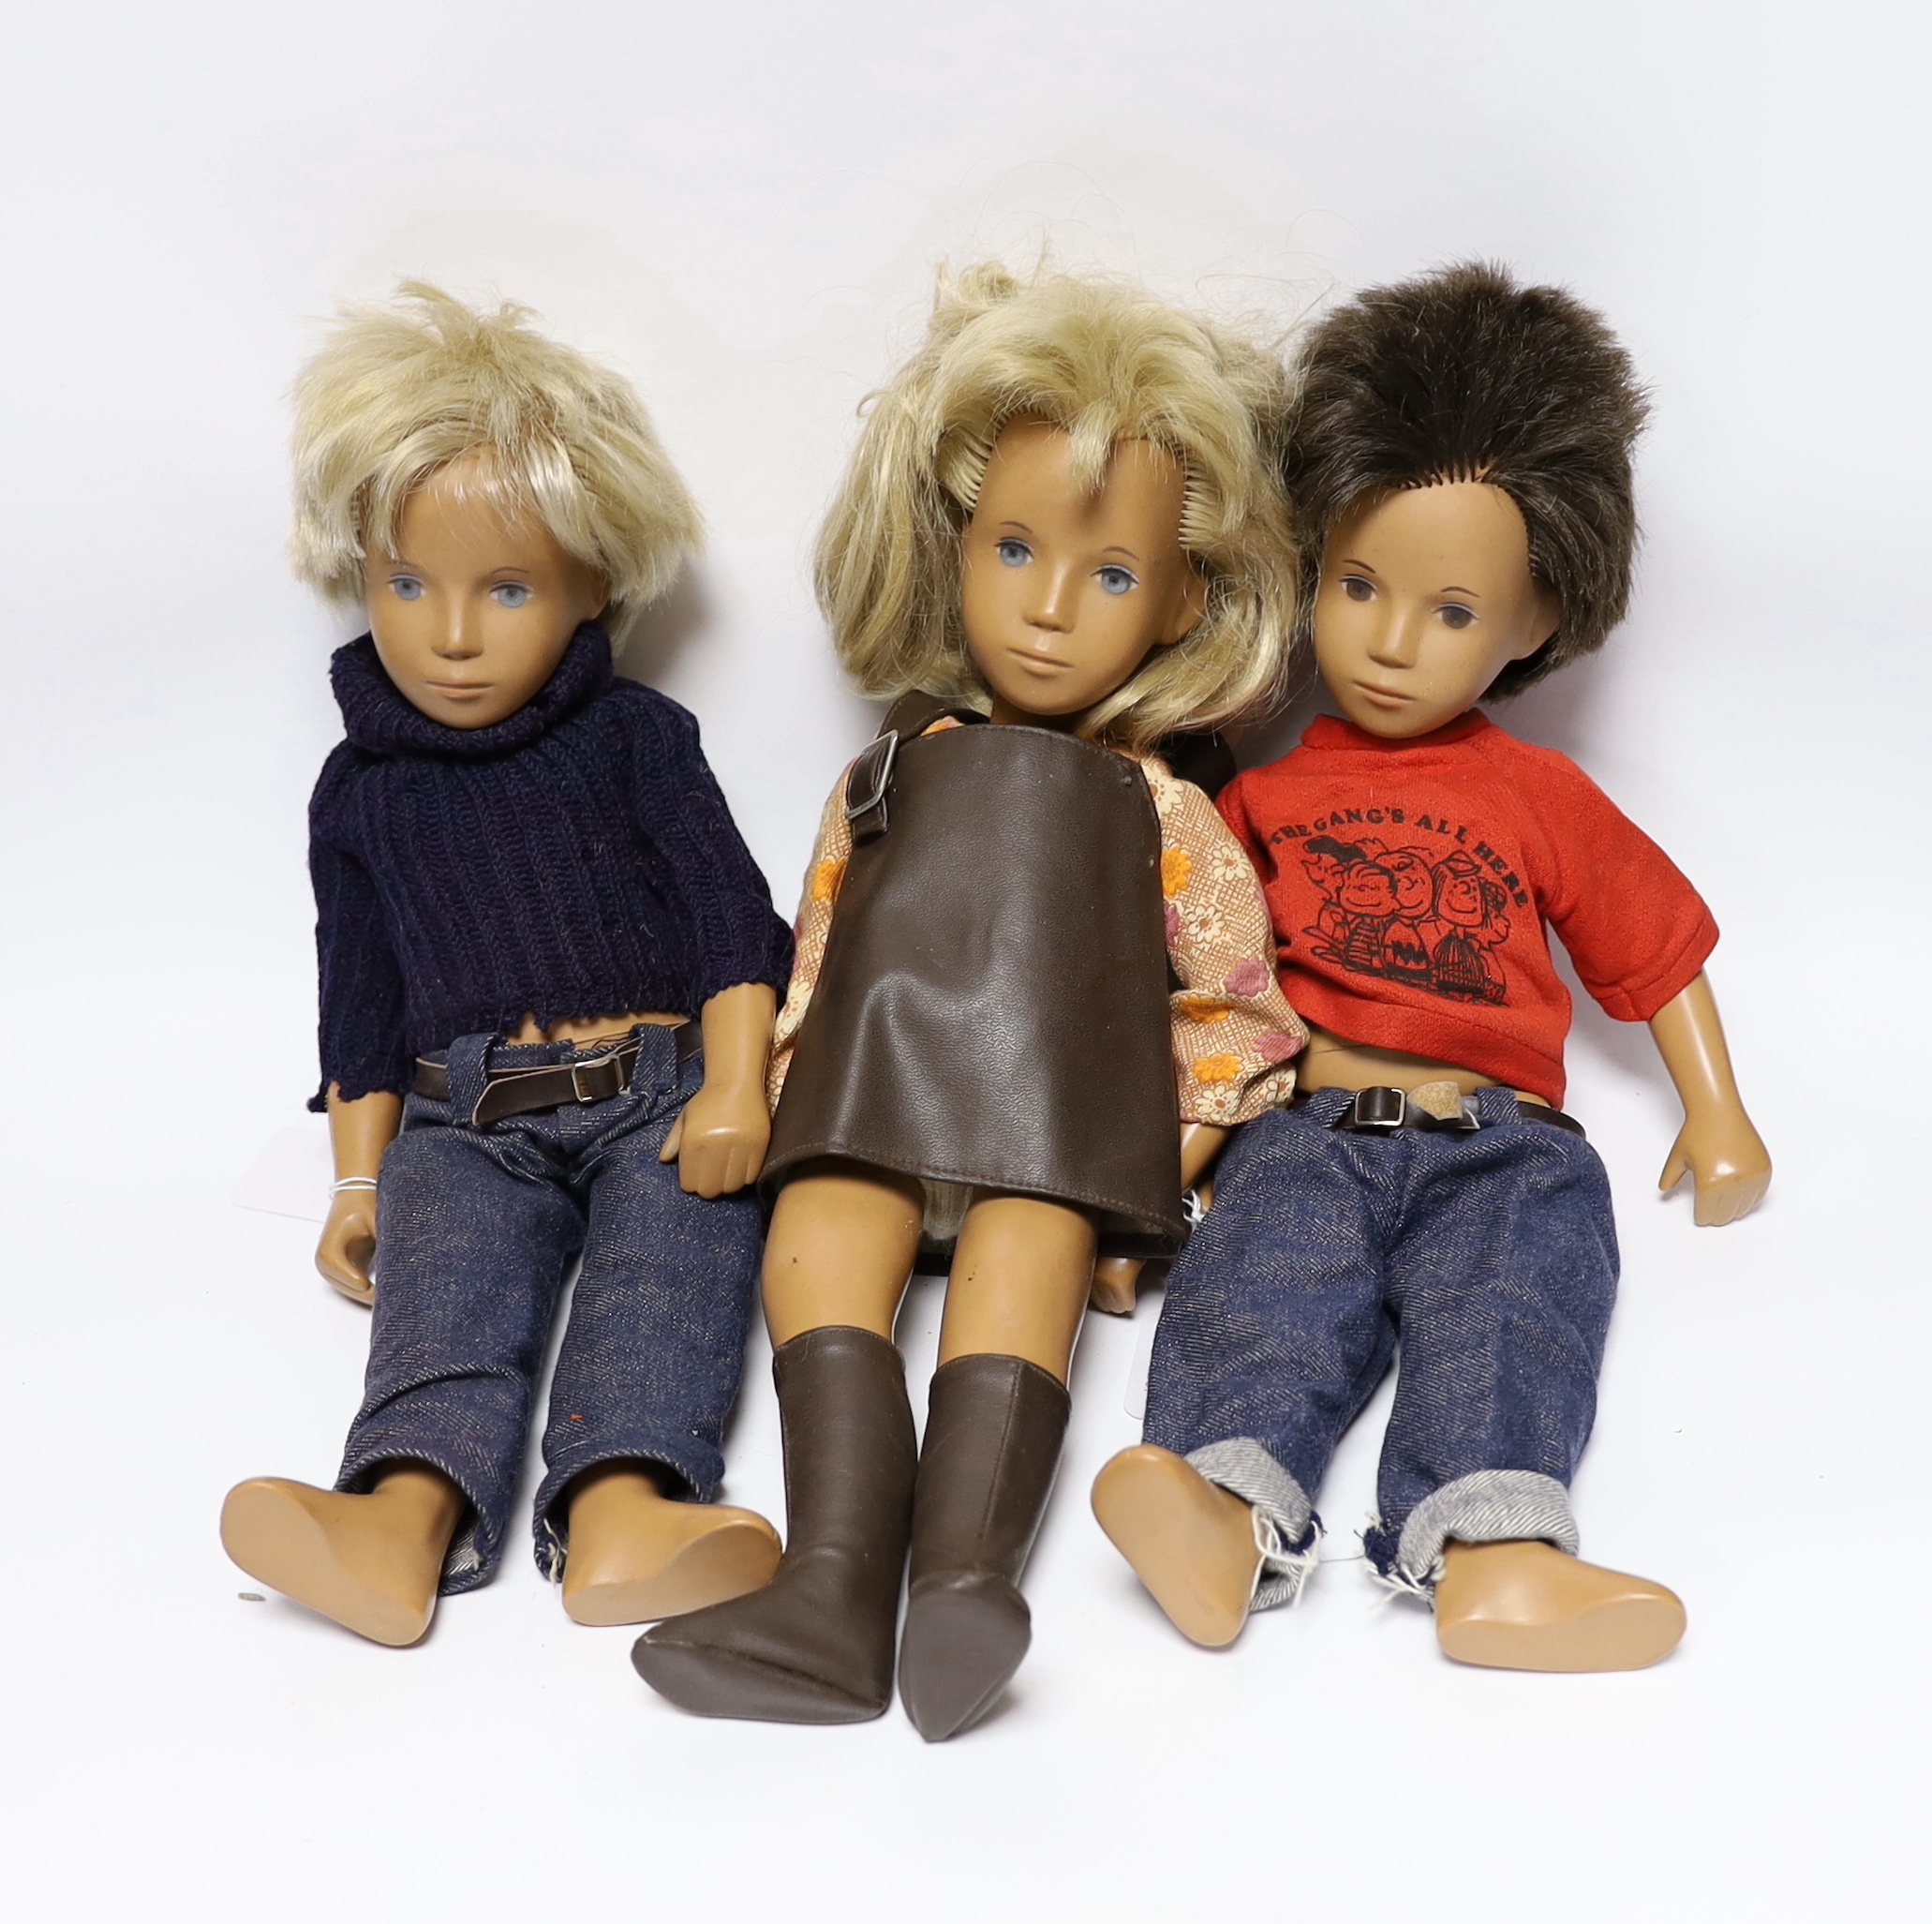 A collection of three Sasha 'Tredon' dolls, c.1970's, in original condition, with a small bag of clothes                                                                                                                    